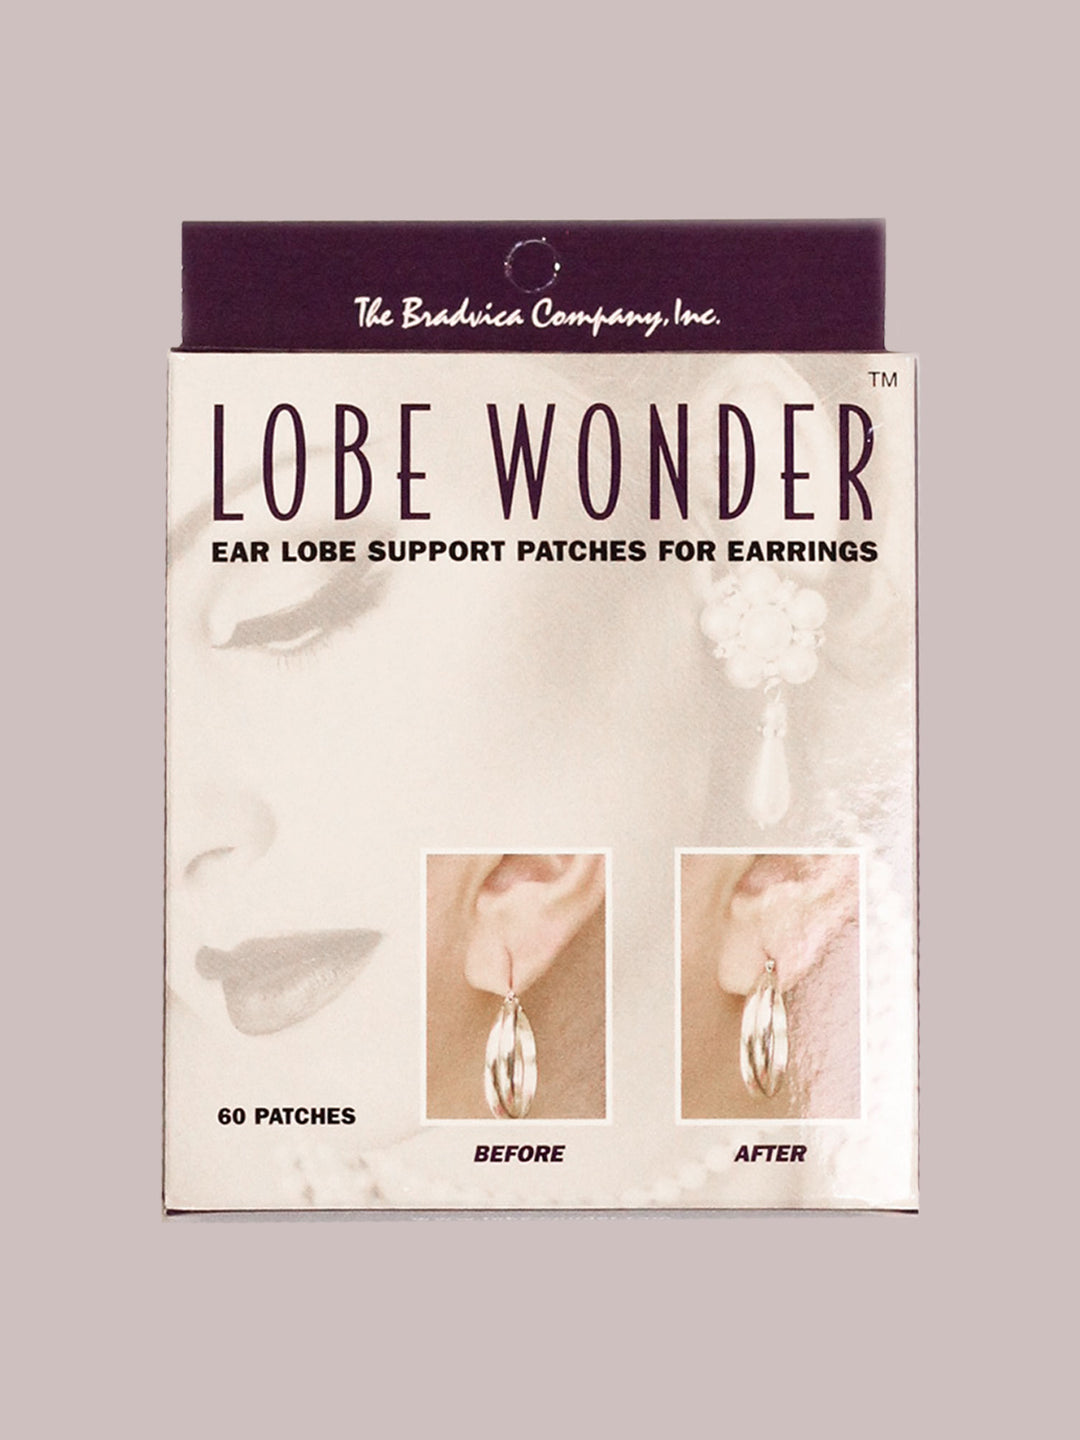 MIRACLE LOBE WONDER EARRING SUPPORT PATCHES-2 PACK-TOTAL OF 120